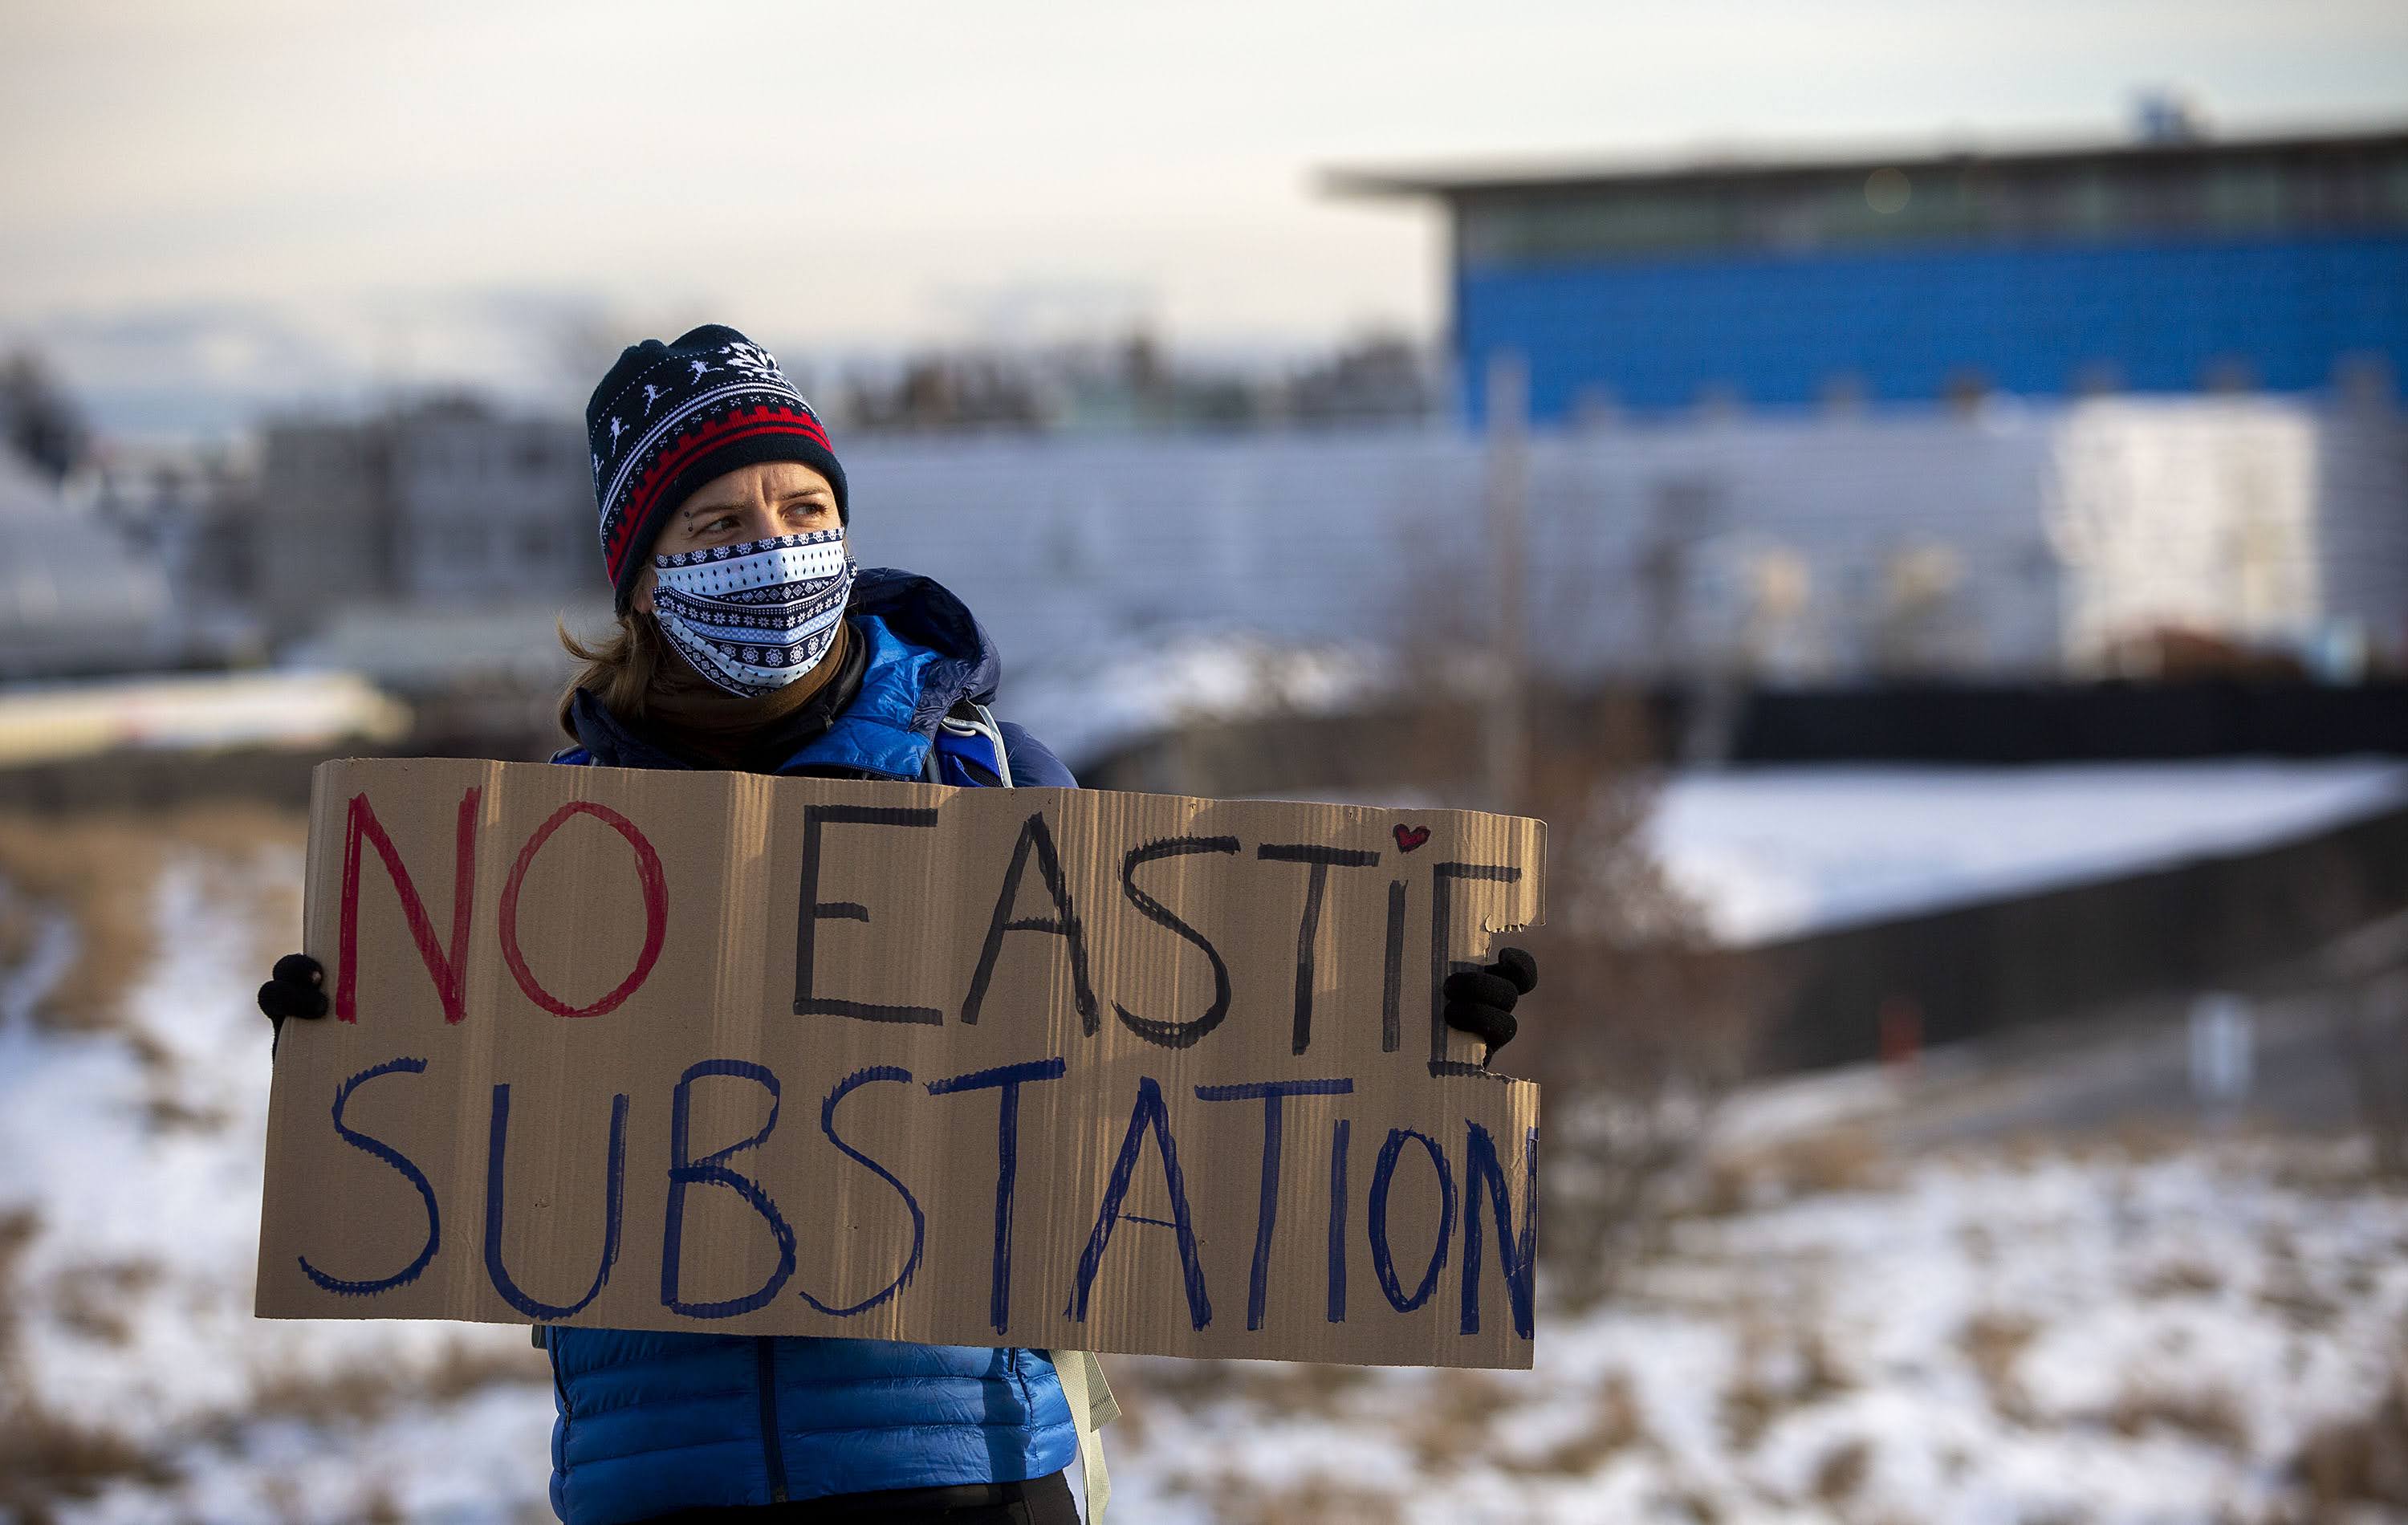 Juliane Manitz carries a "No Eastie Substation" sign at a protest against the proposed East Boston electrical substation. The proposed site is the fenced, snow covered area behind her. (Robin Lubbock/WBUR)